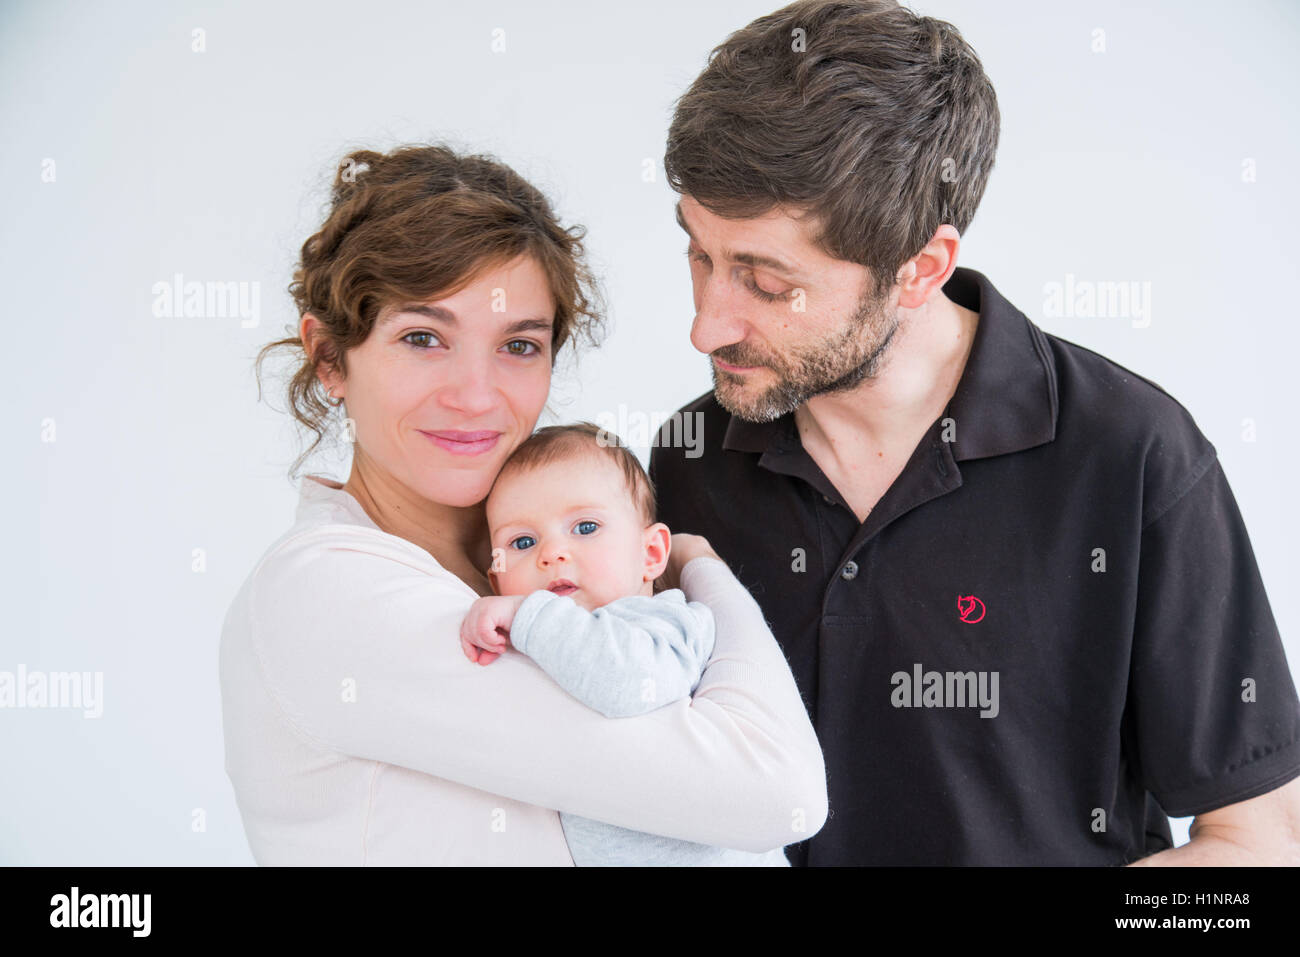 3 months old baby girl with parents. Stock Photo